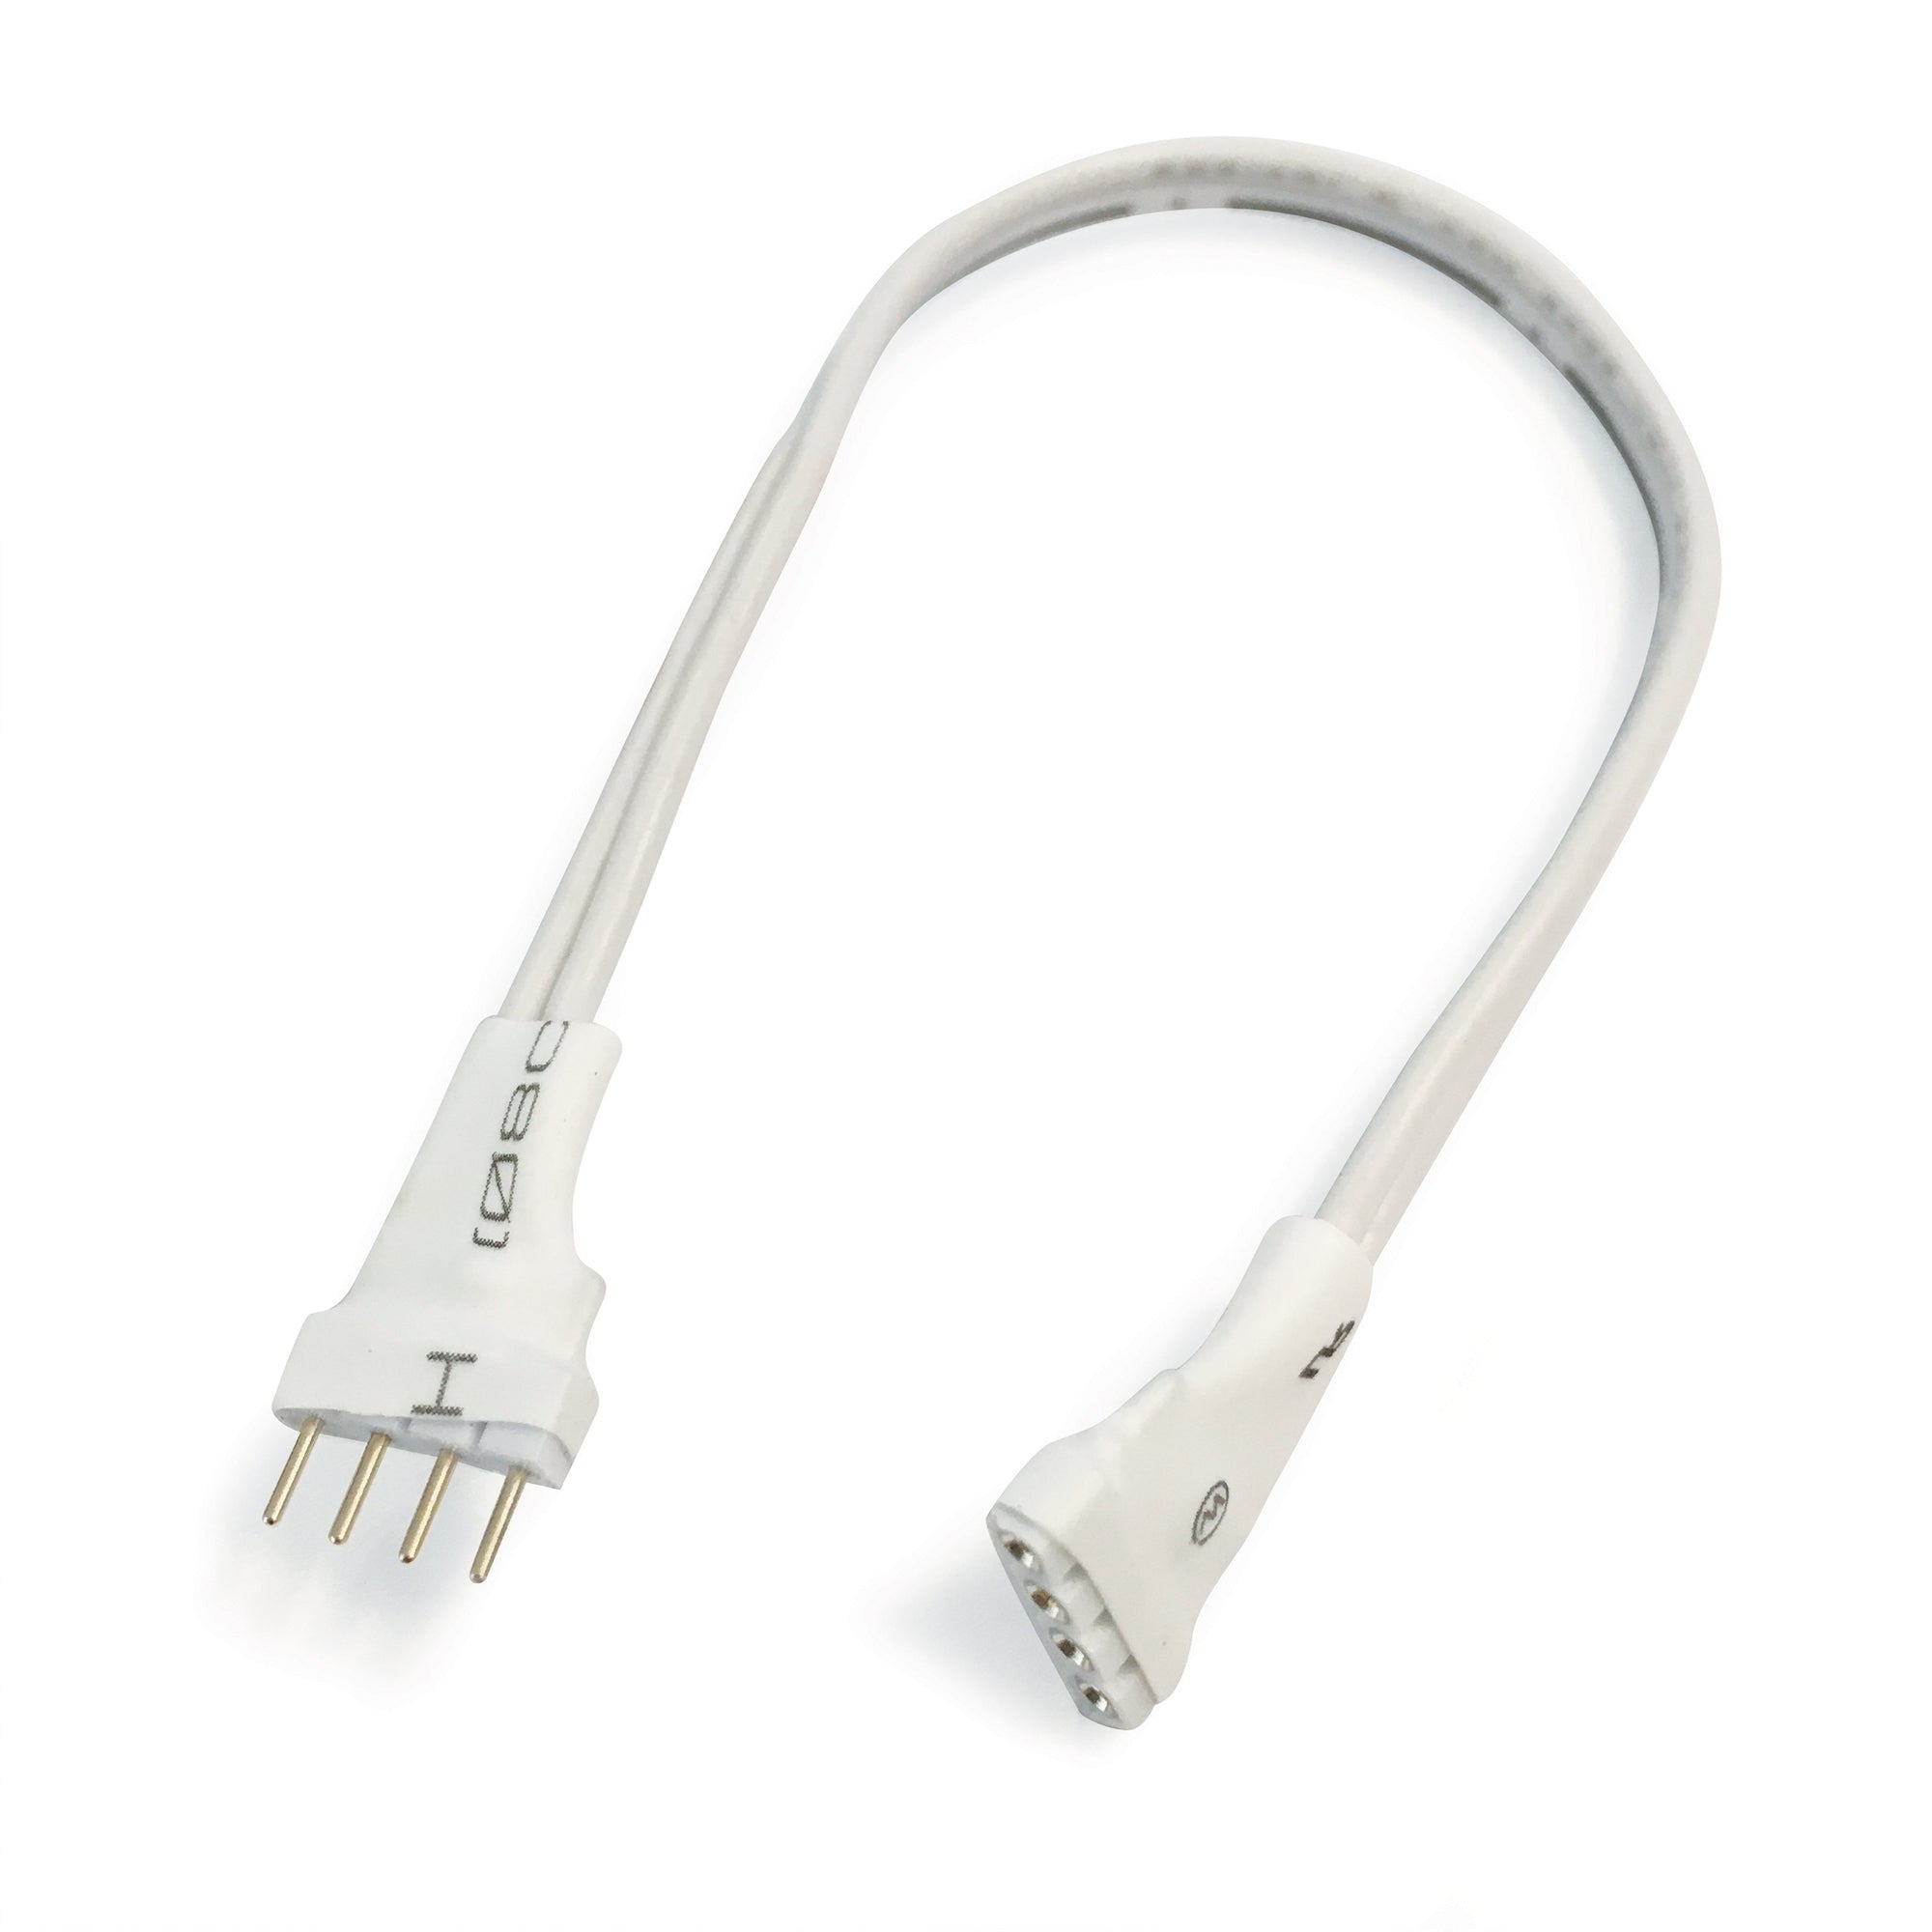 Nora Lighting NATL-202W - Accent / Undercabinet - 2 Inch Interconnection Cable for Standard & Side-Lit Tape Light, White